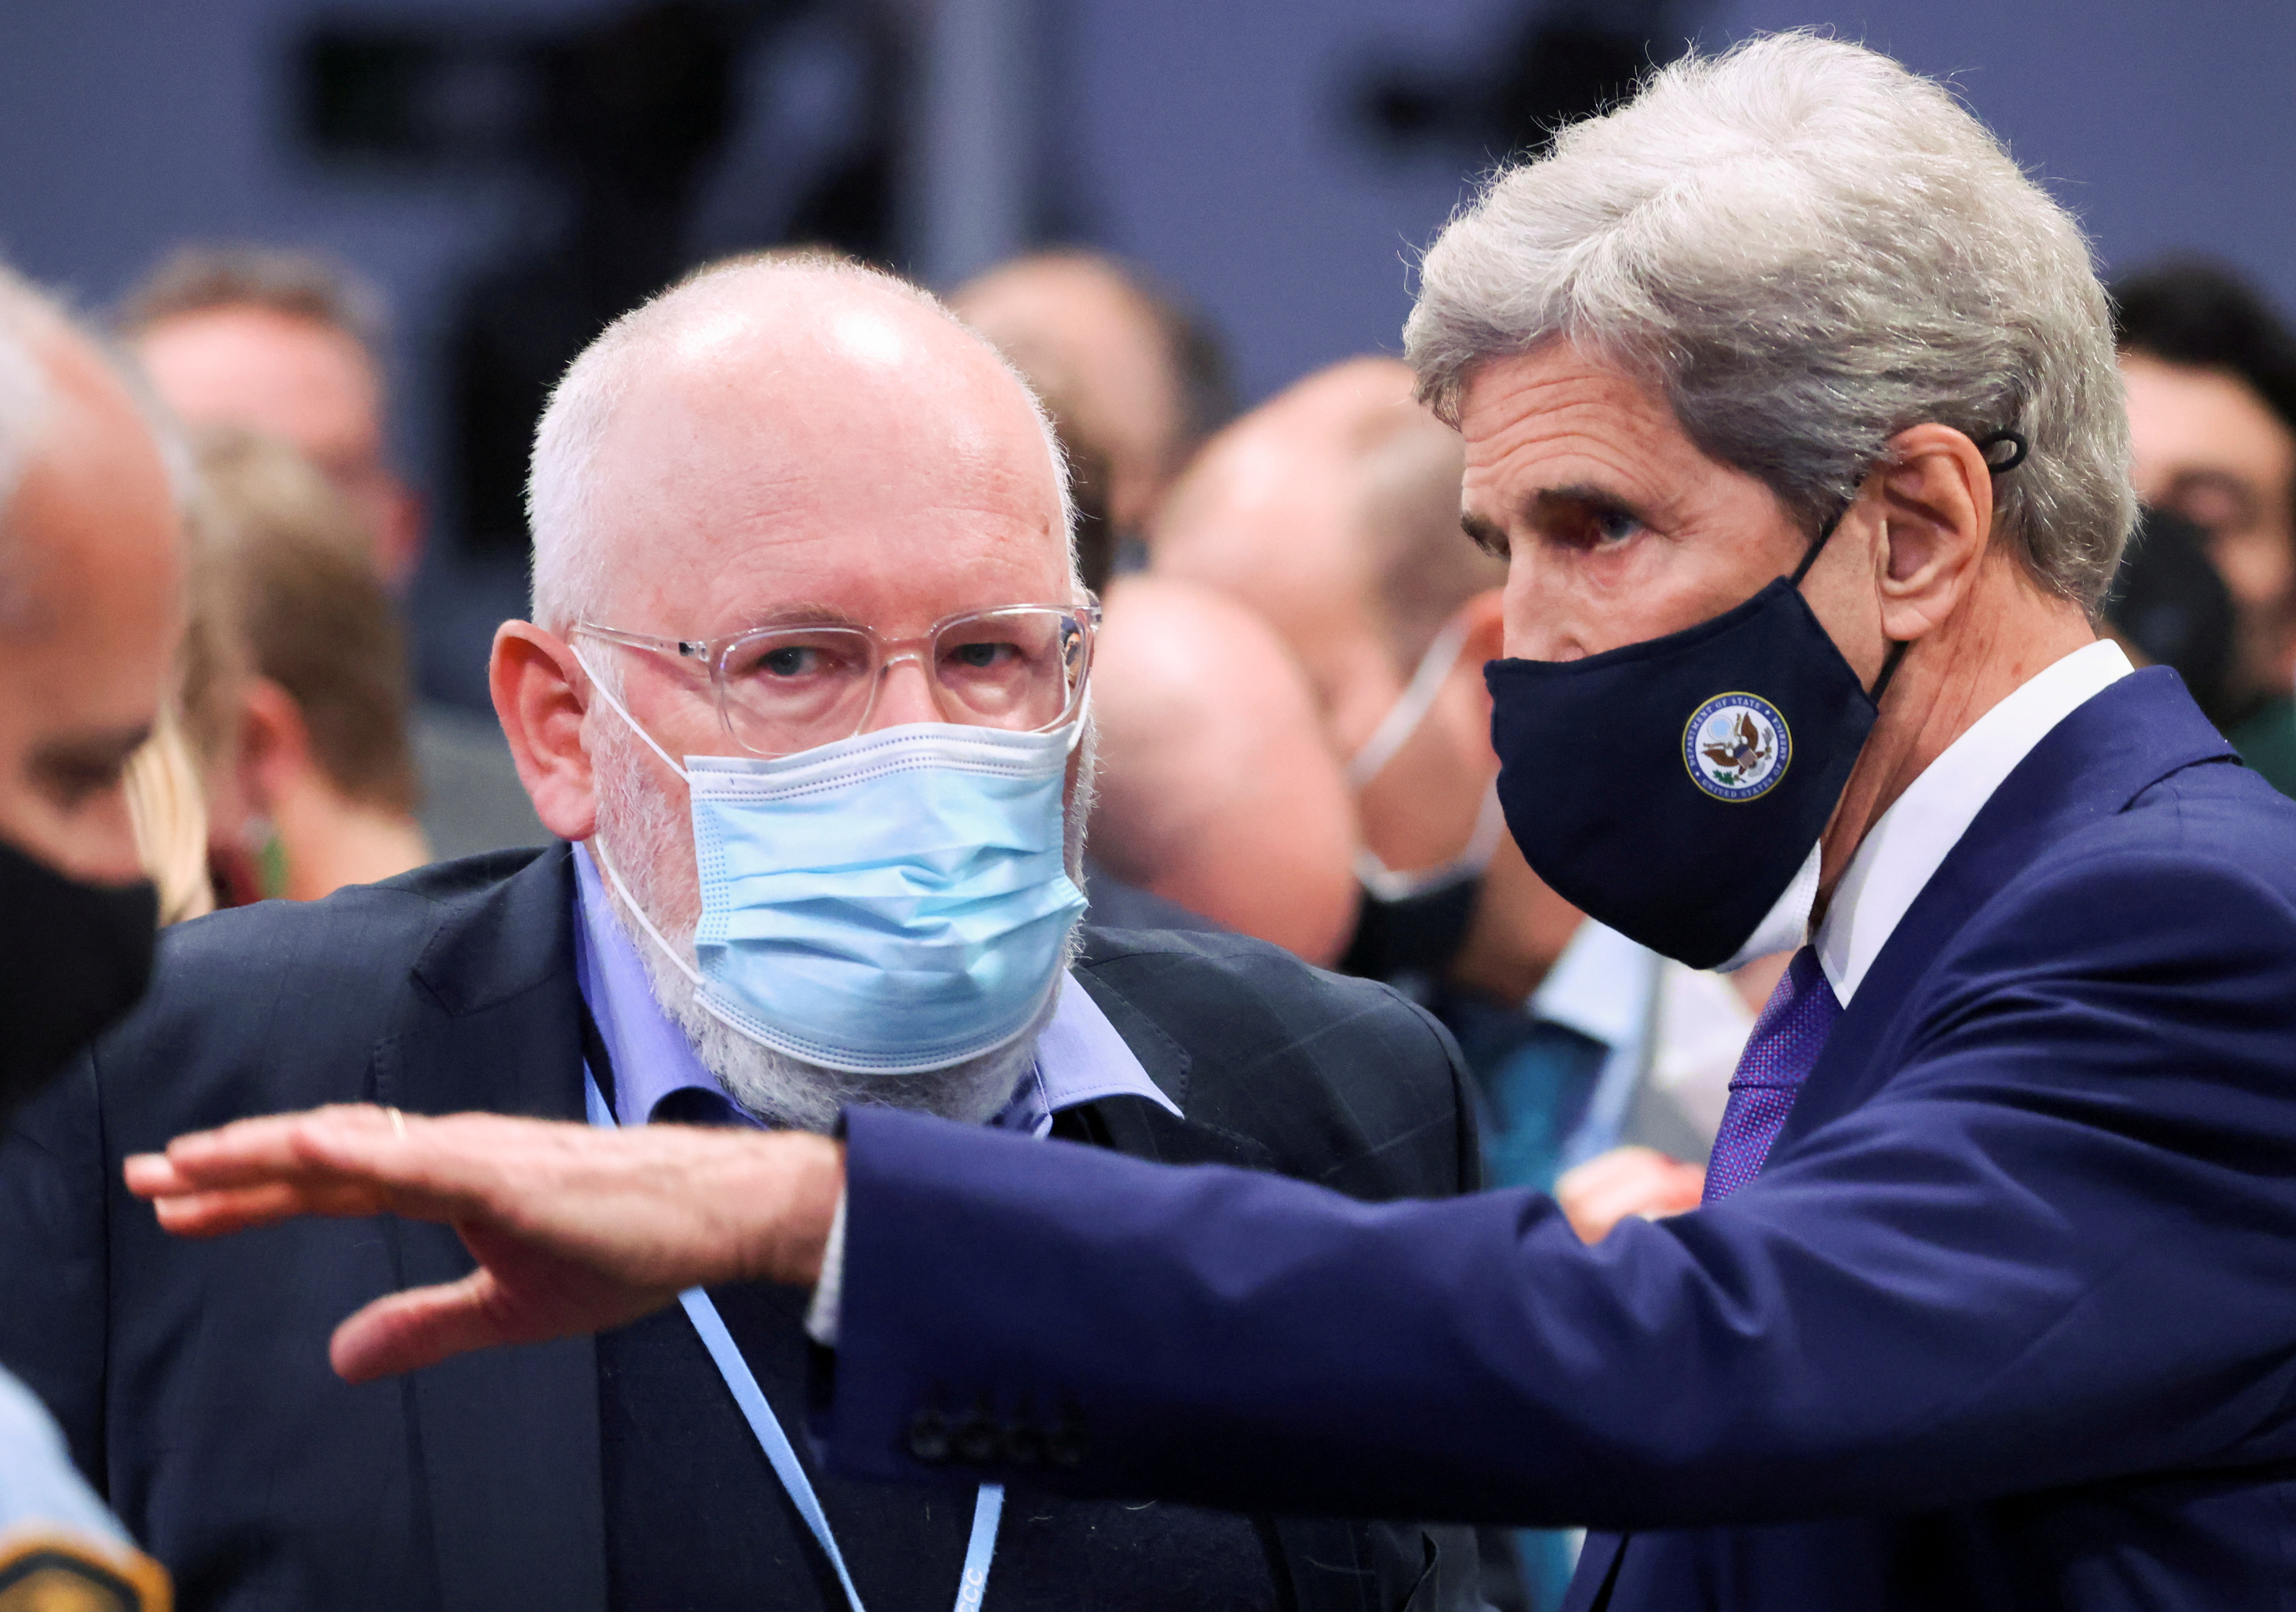 U.S. climate envoy John Kerry talks with European Commission Vice President Frans Timmermans during the UN Climate Change Conference (COP26) in Glasgow, Scotland, Britain November 13, 2021. REUTERS/Yves Herman/File Photo